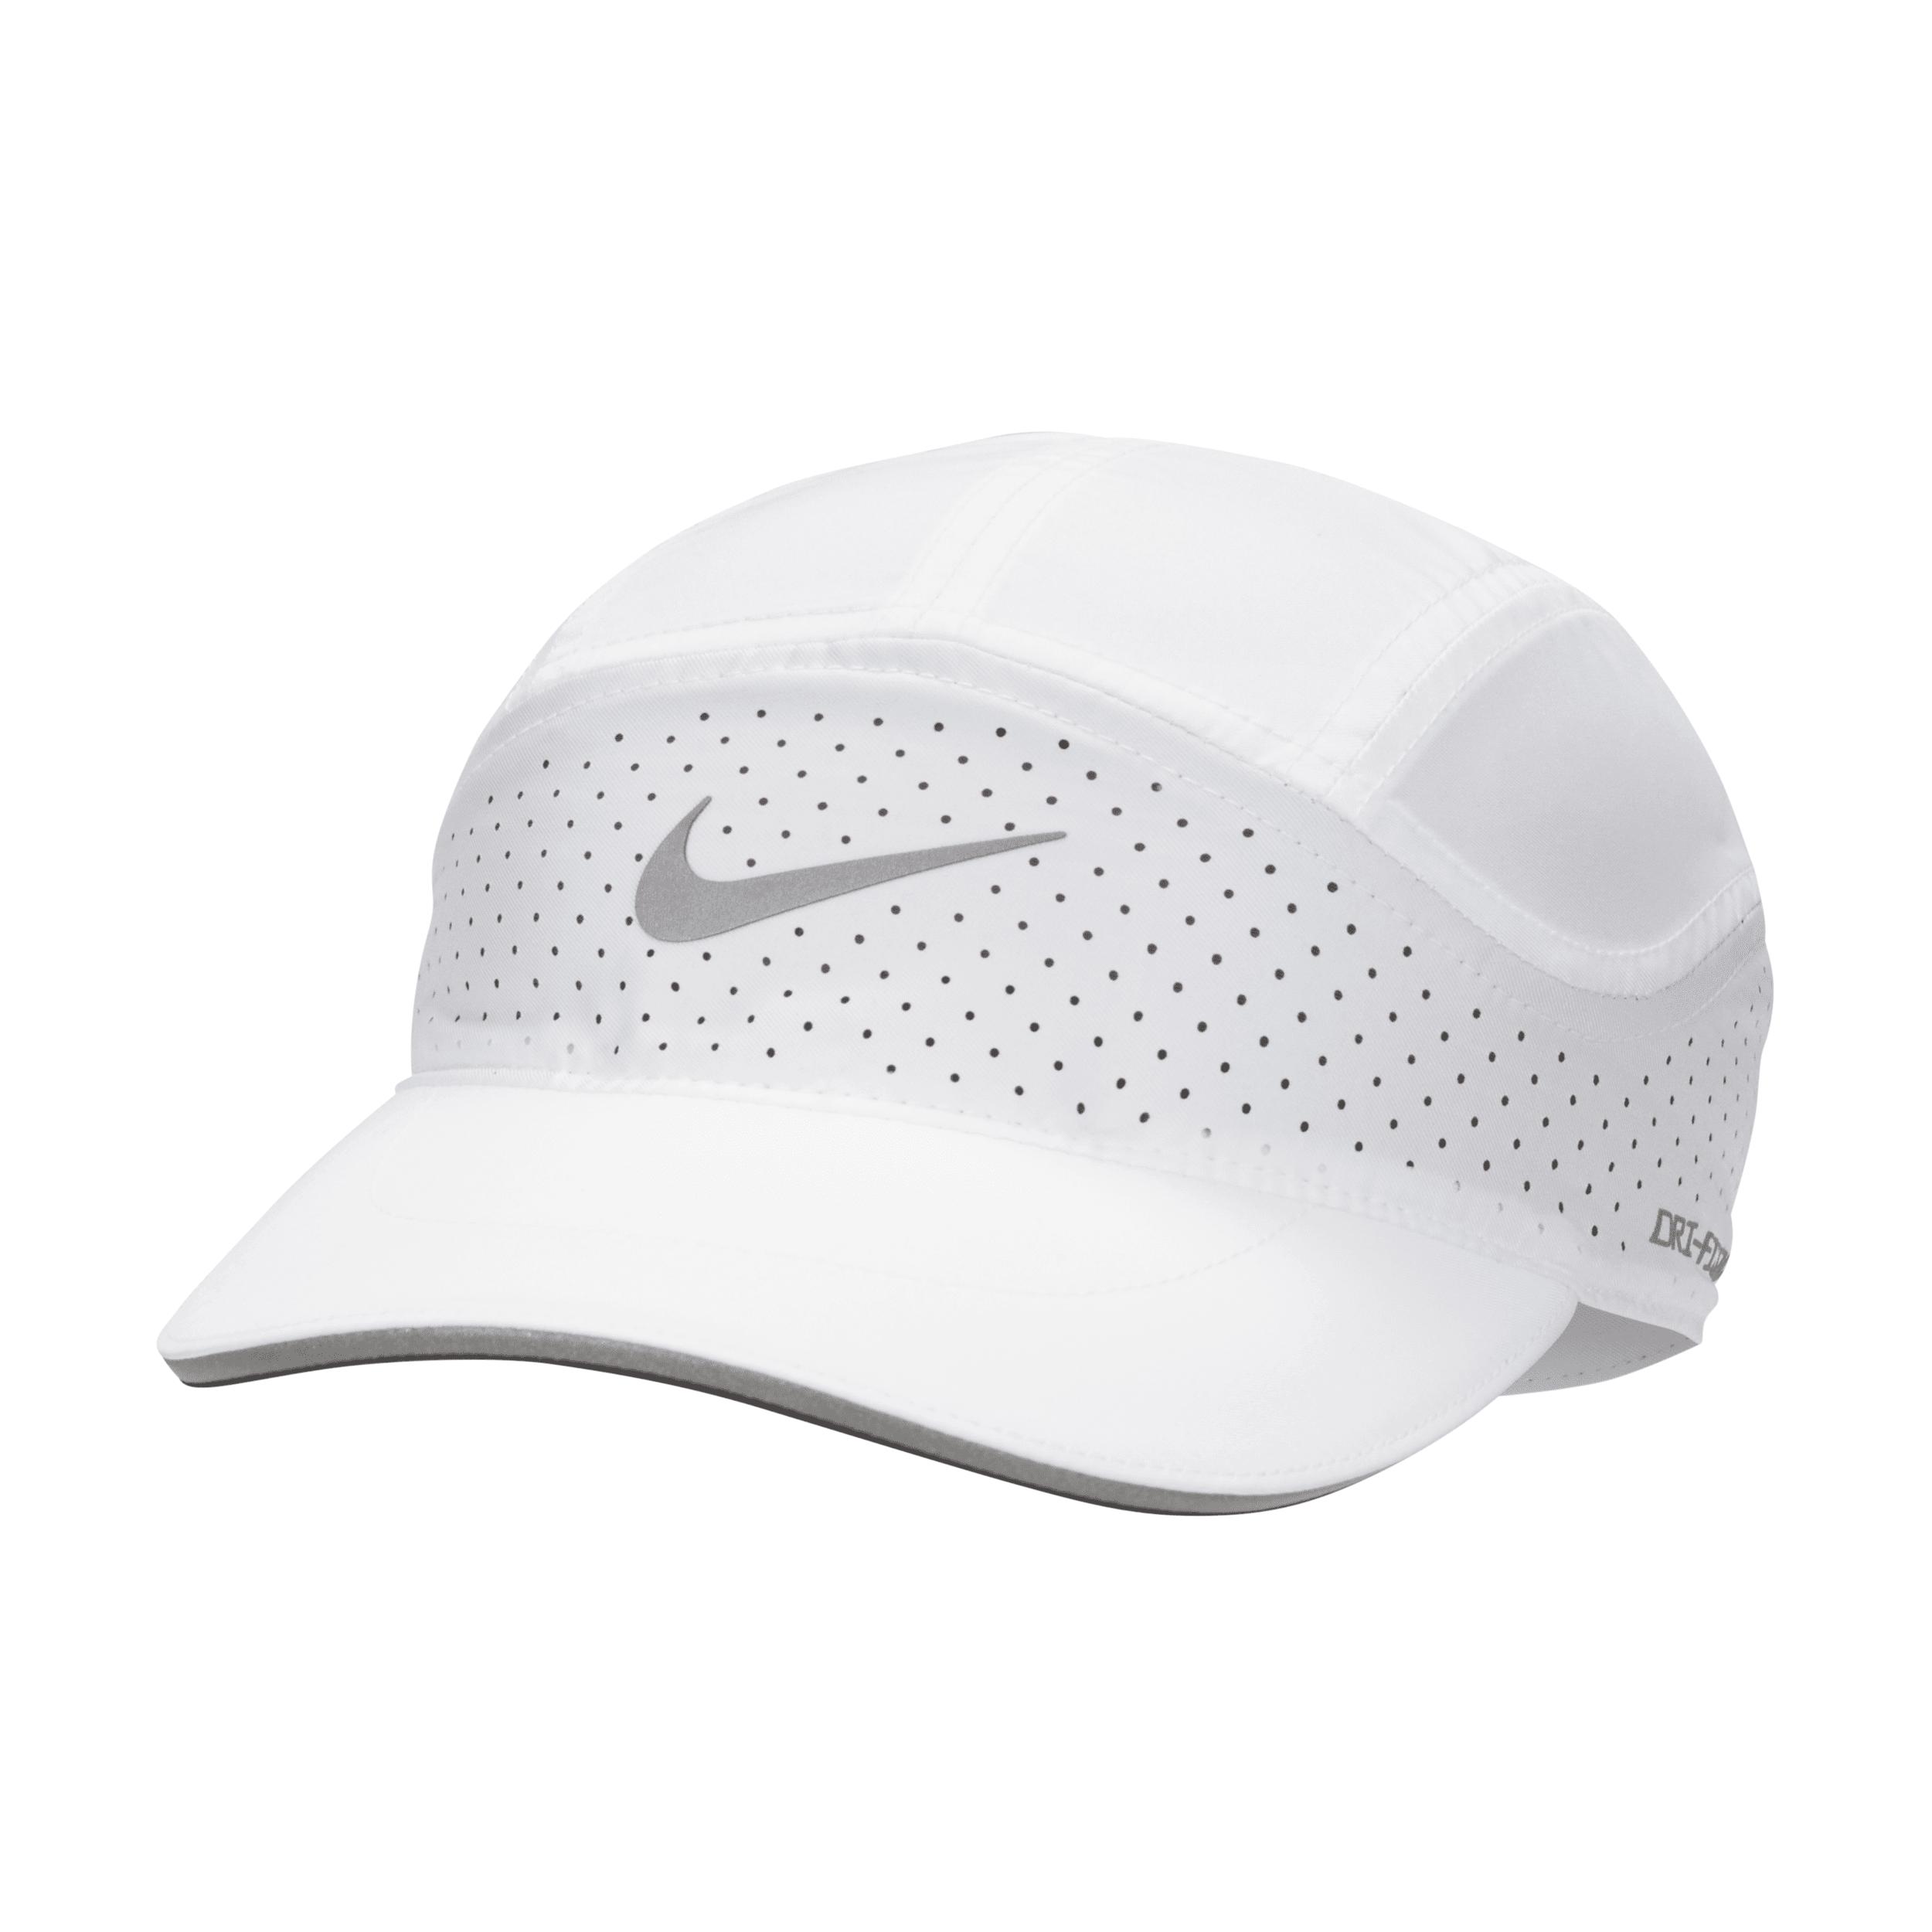 Nike Dri-fit Adv Fly Unstructured Reflective Cap in White | Lyst